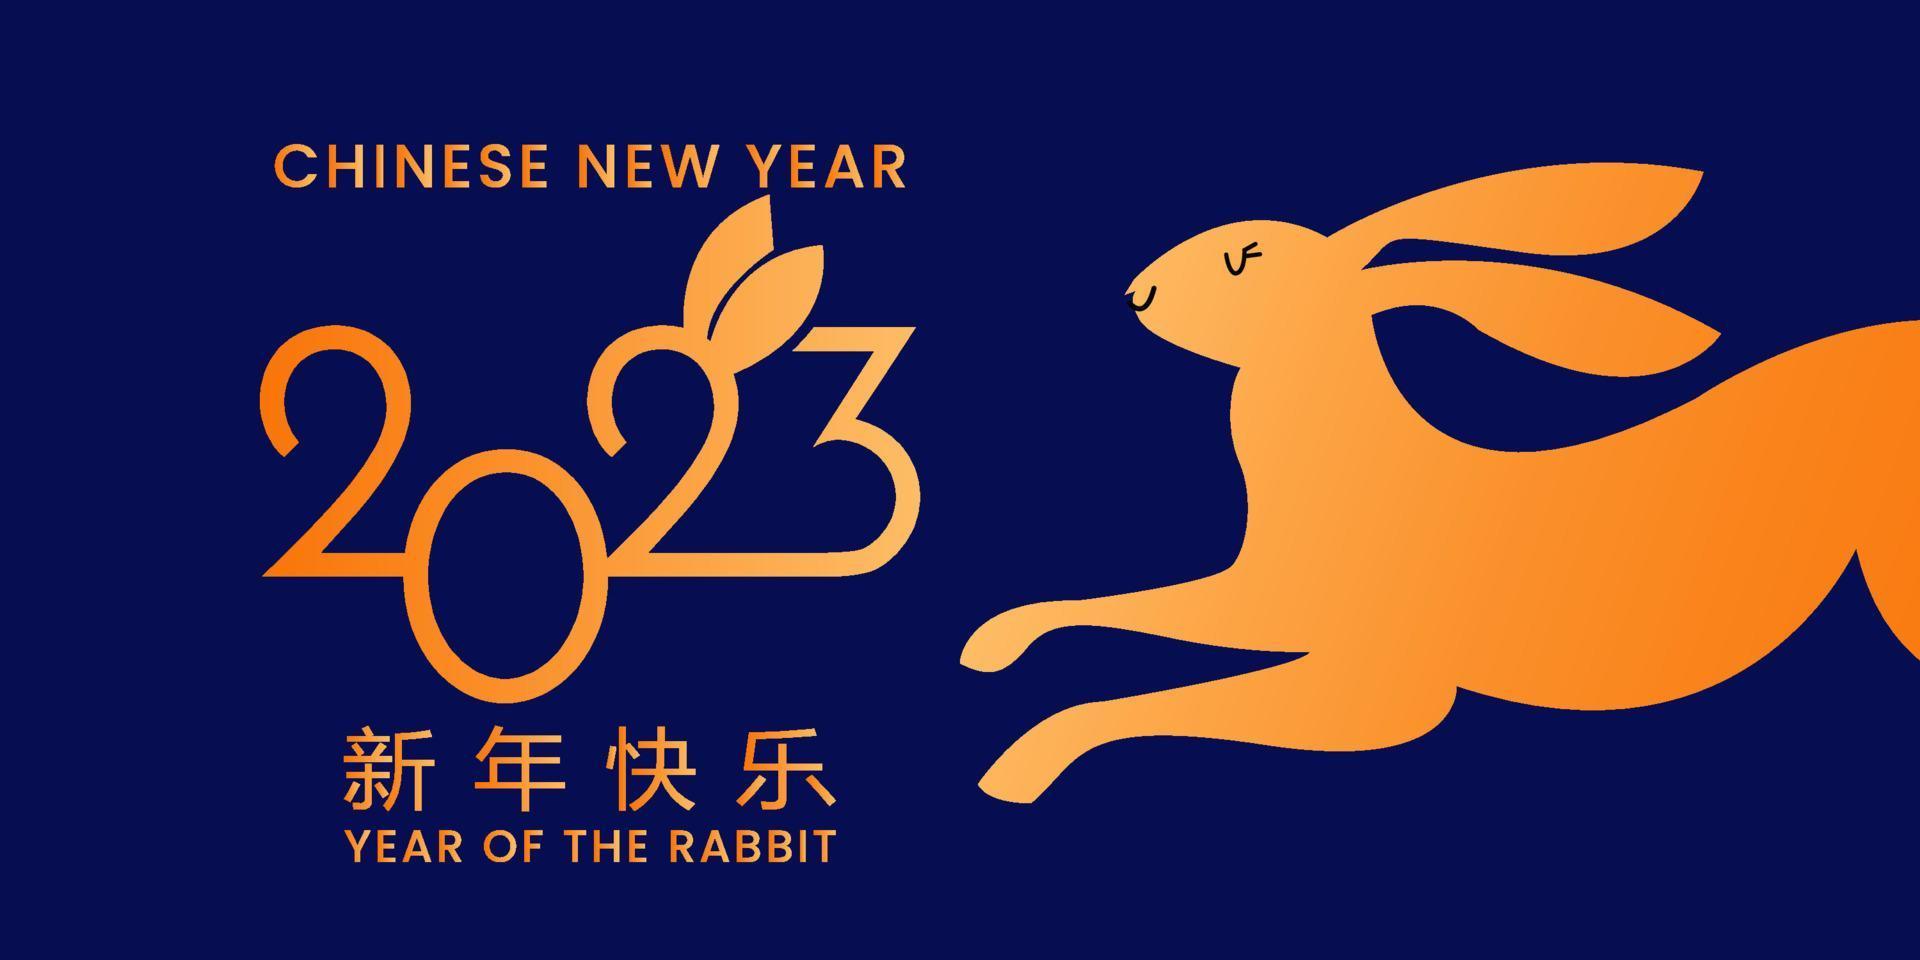 Chinese new year 2023 year of the rabbit - Chinese zodiac symbol, Lunar new year concept, blue and golden modern background design vector